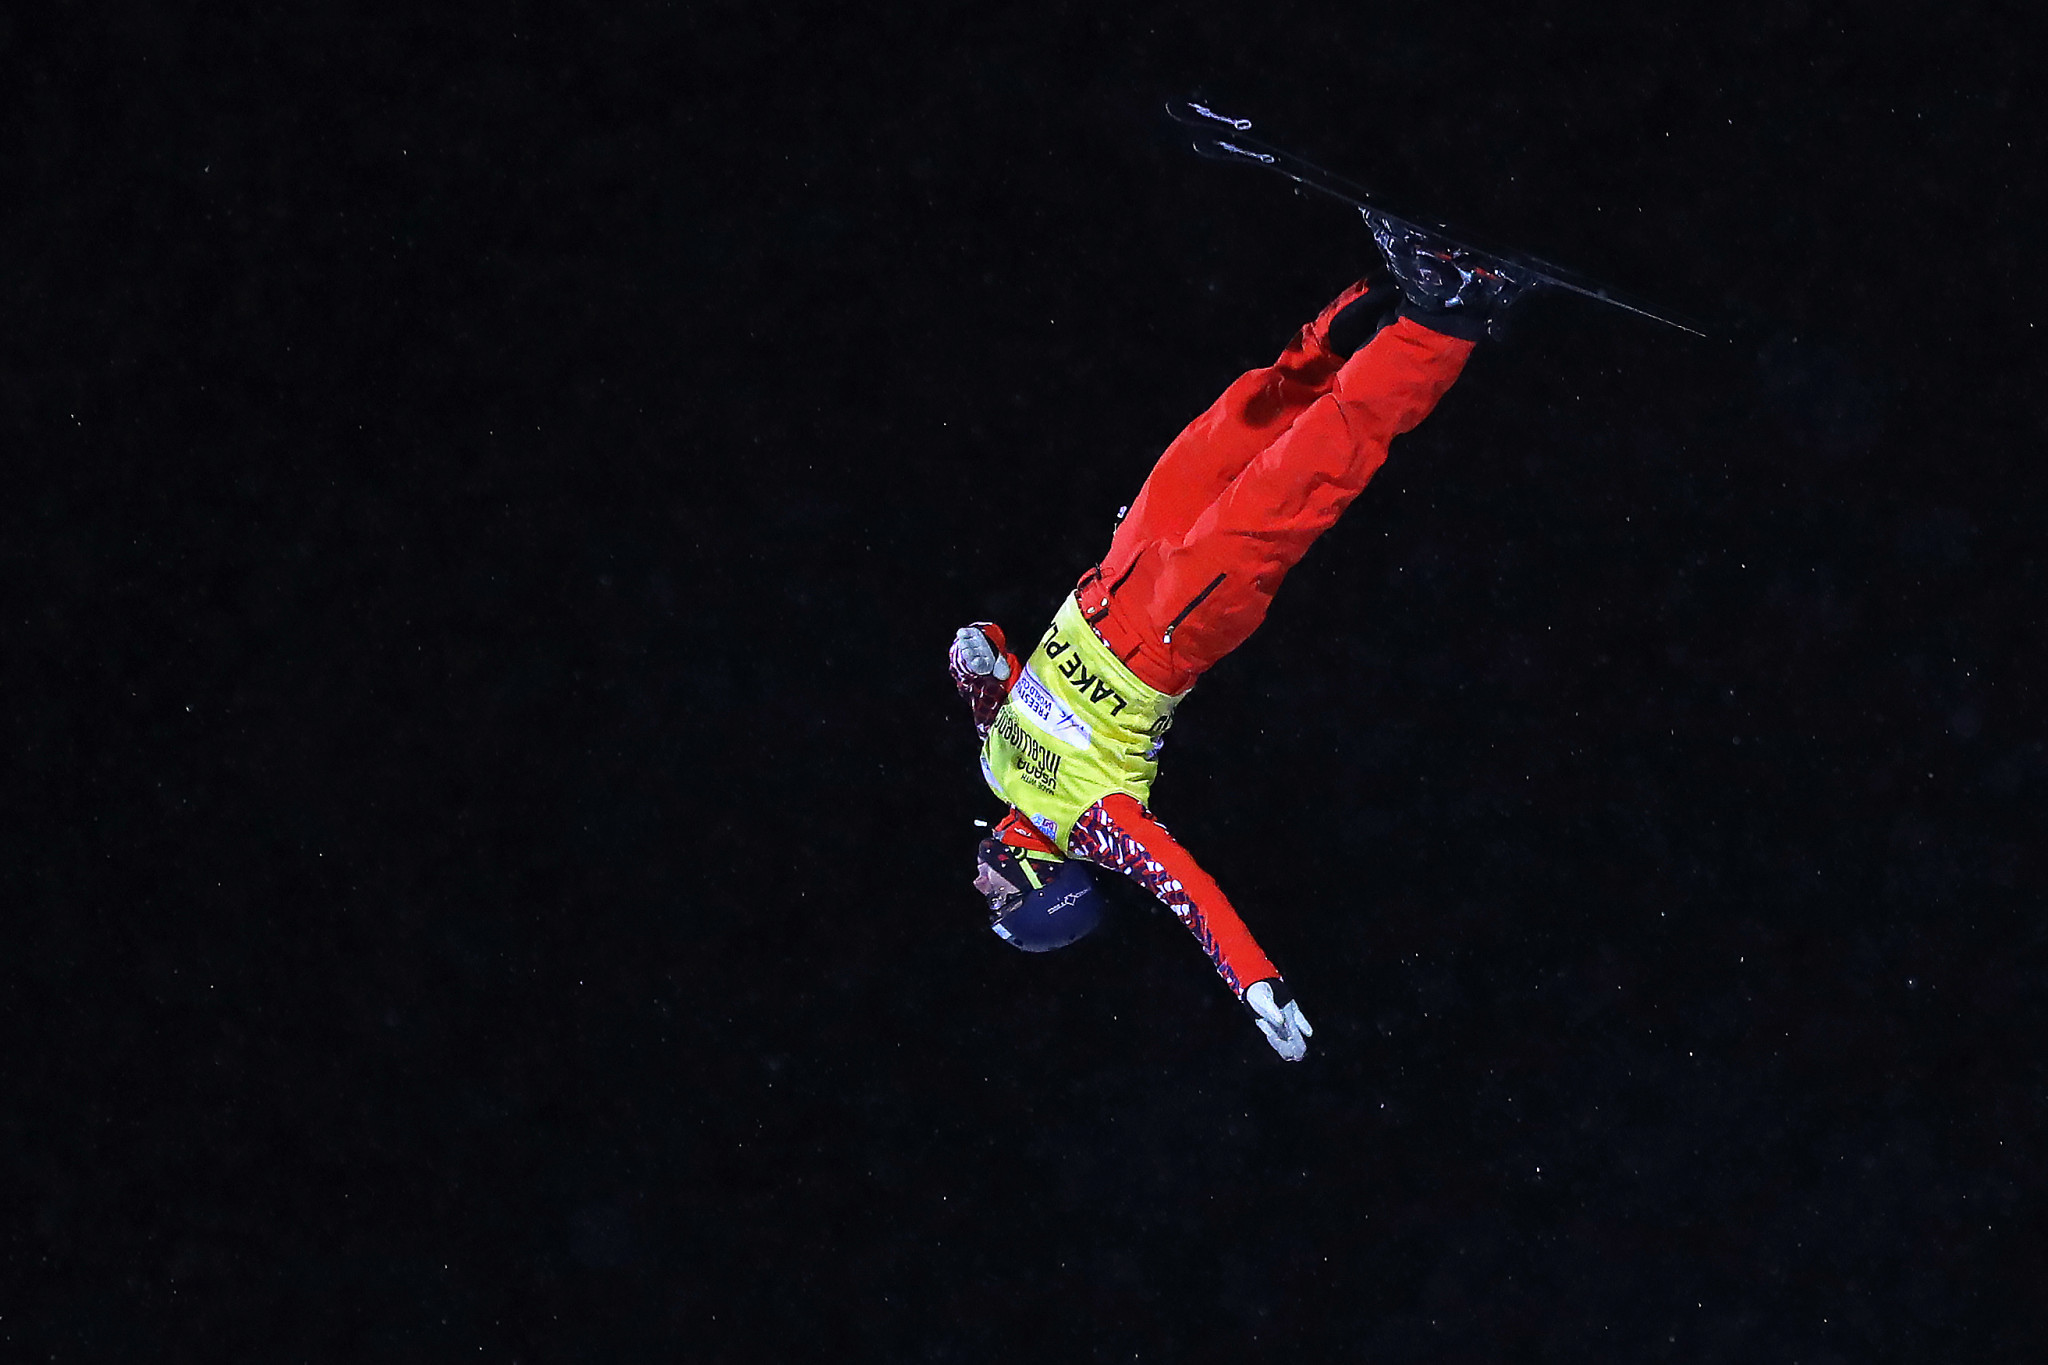 Aerials skiier Maxim Burov will be a gold medal contender at Beijing 2022 ©Getty Images